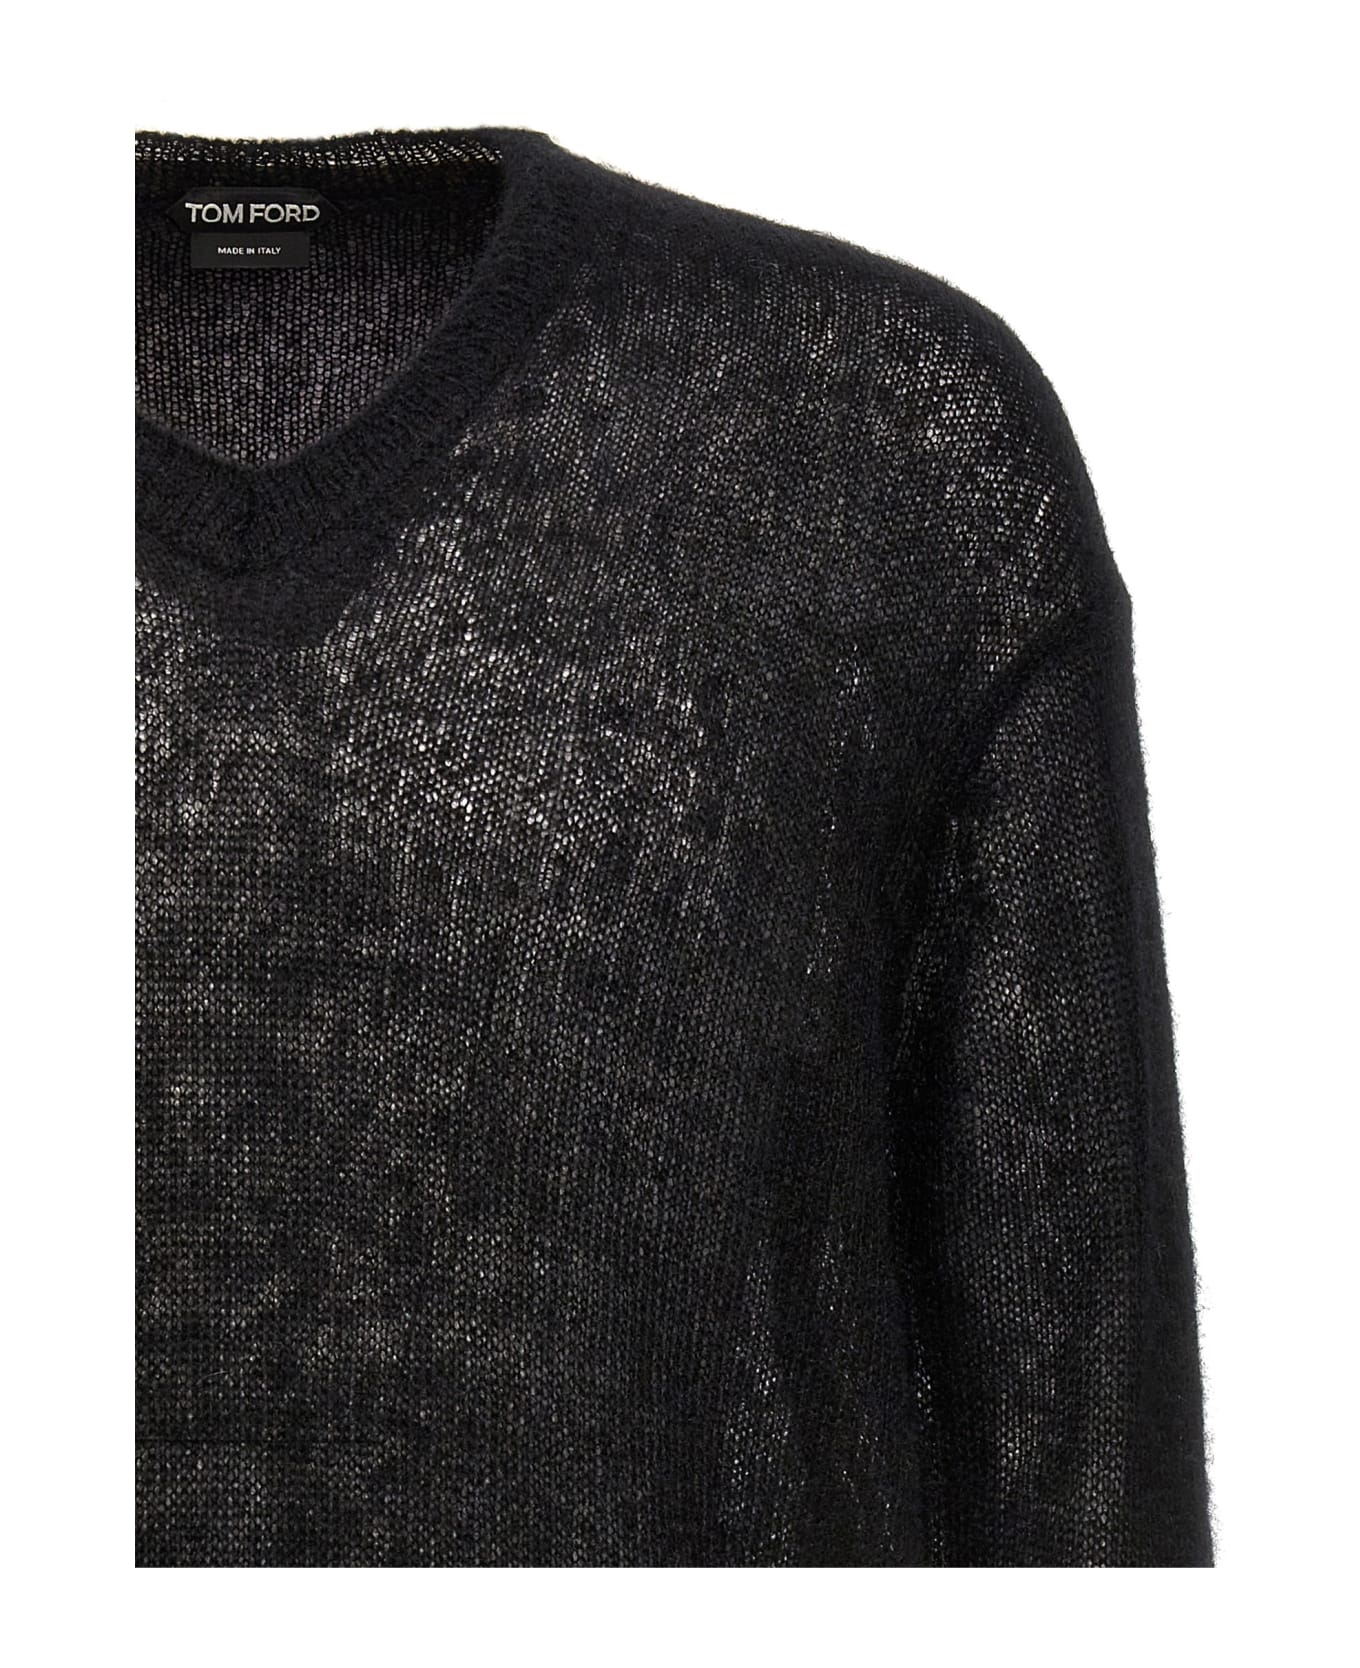 Tom Ford Mohair Sweater - Nero